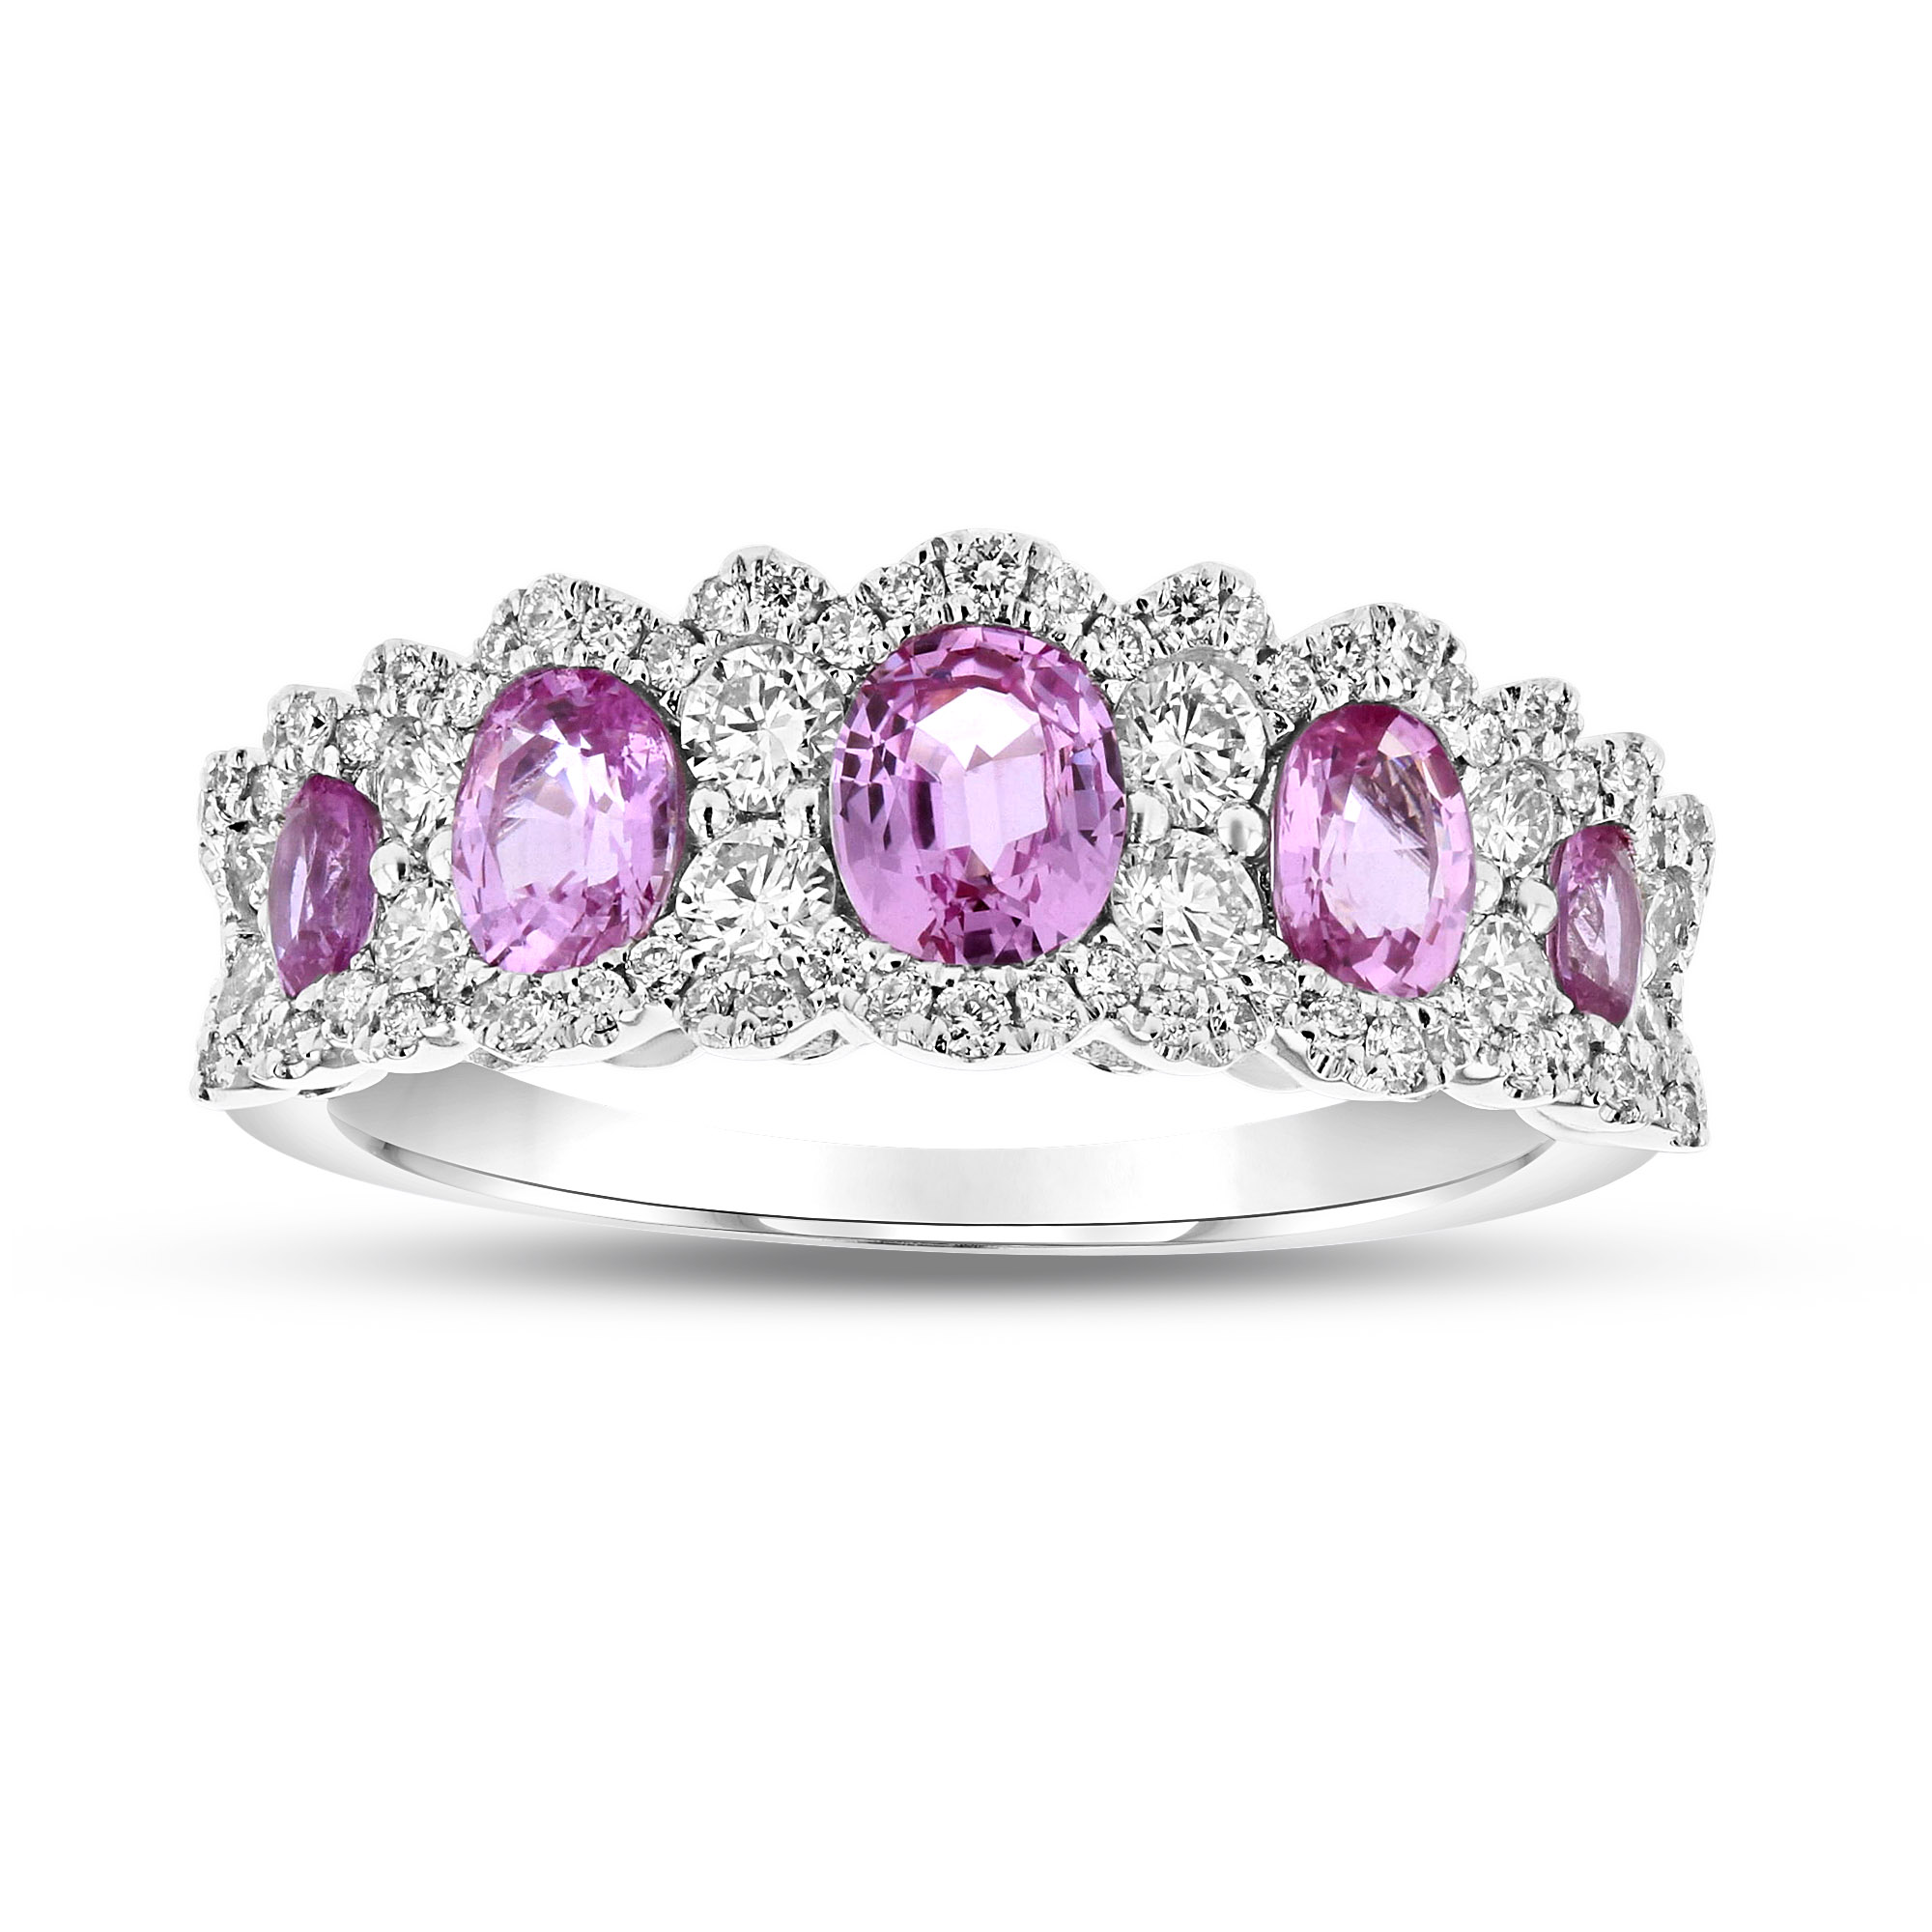 View 1.79ctw Diamond and Pink Sapphire Ring in 18k White Gold